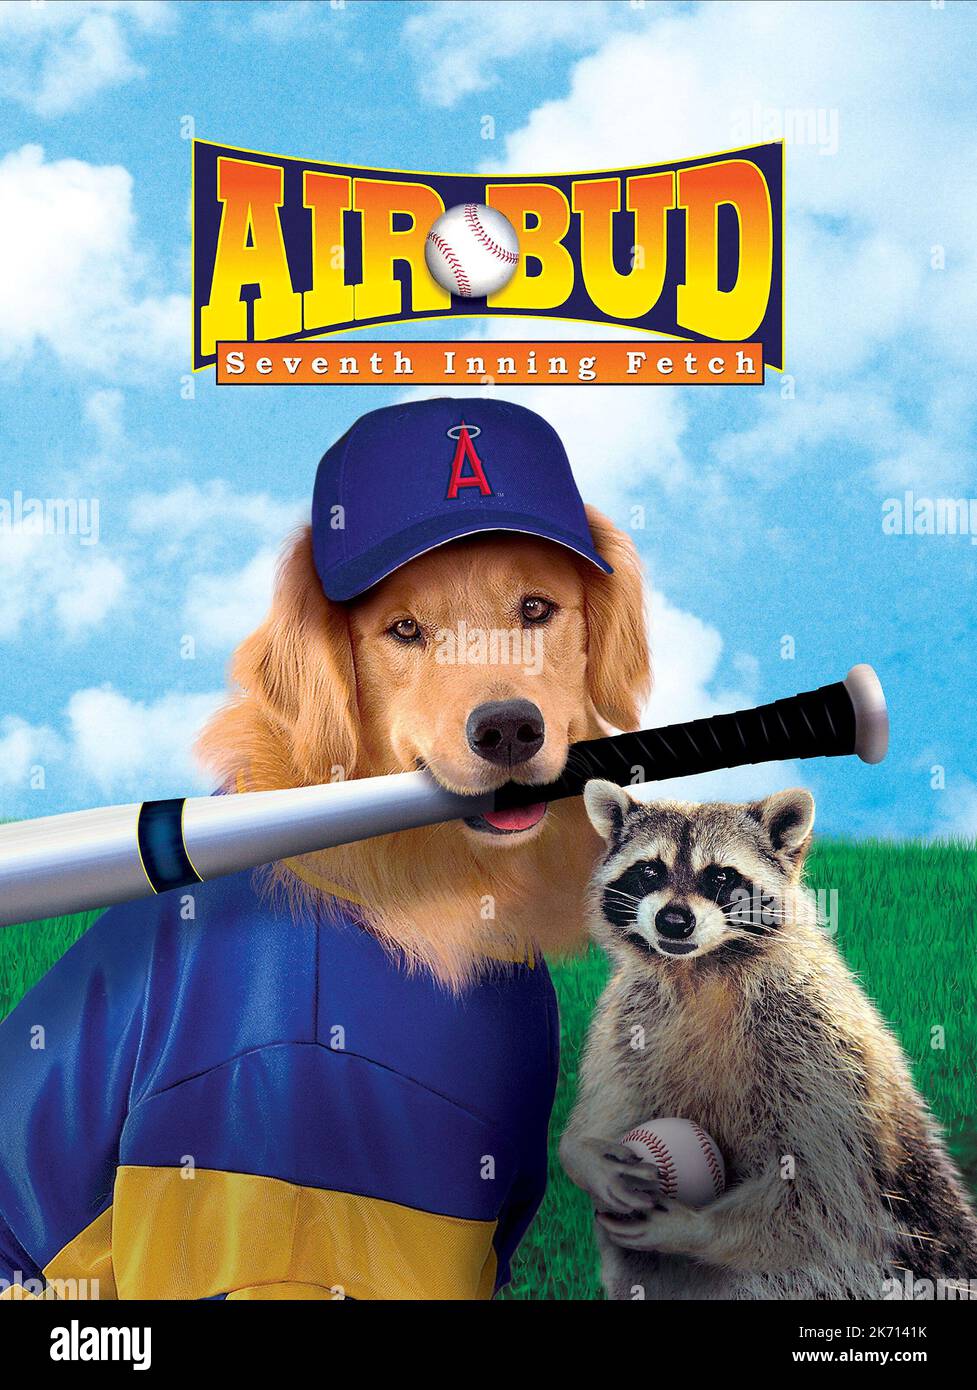 BUD-FILMPOSTER, AIR BUD: 7. INNING-FETCH, 2002 Stockfoto